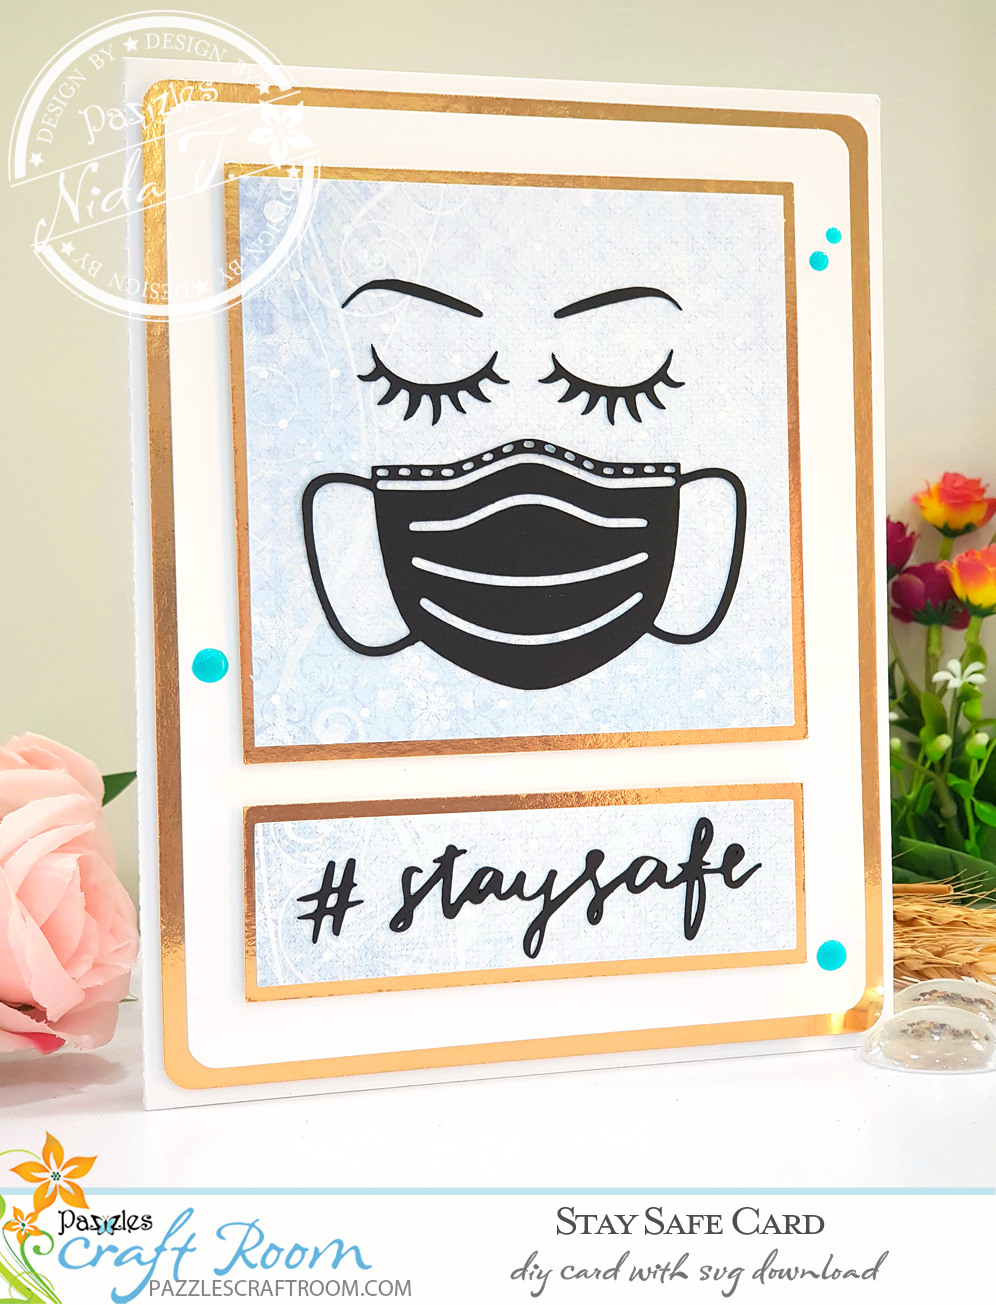 Pazzles DIY Stay Safe Card for Covid-19 Coronavirus Pandemic. Instant SVG download compatible with all major electronic cutters including Pazzles Inspiration, Cricut, and Silhouette Cameo. Design by Nida Tanweer.